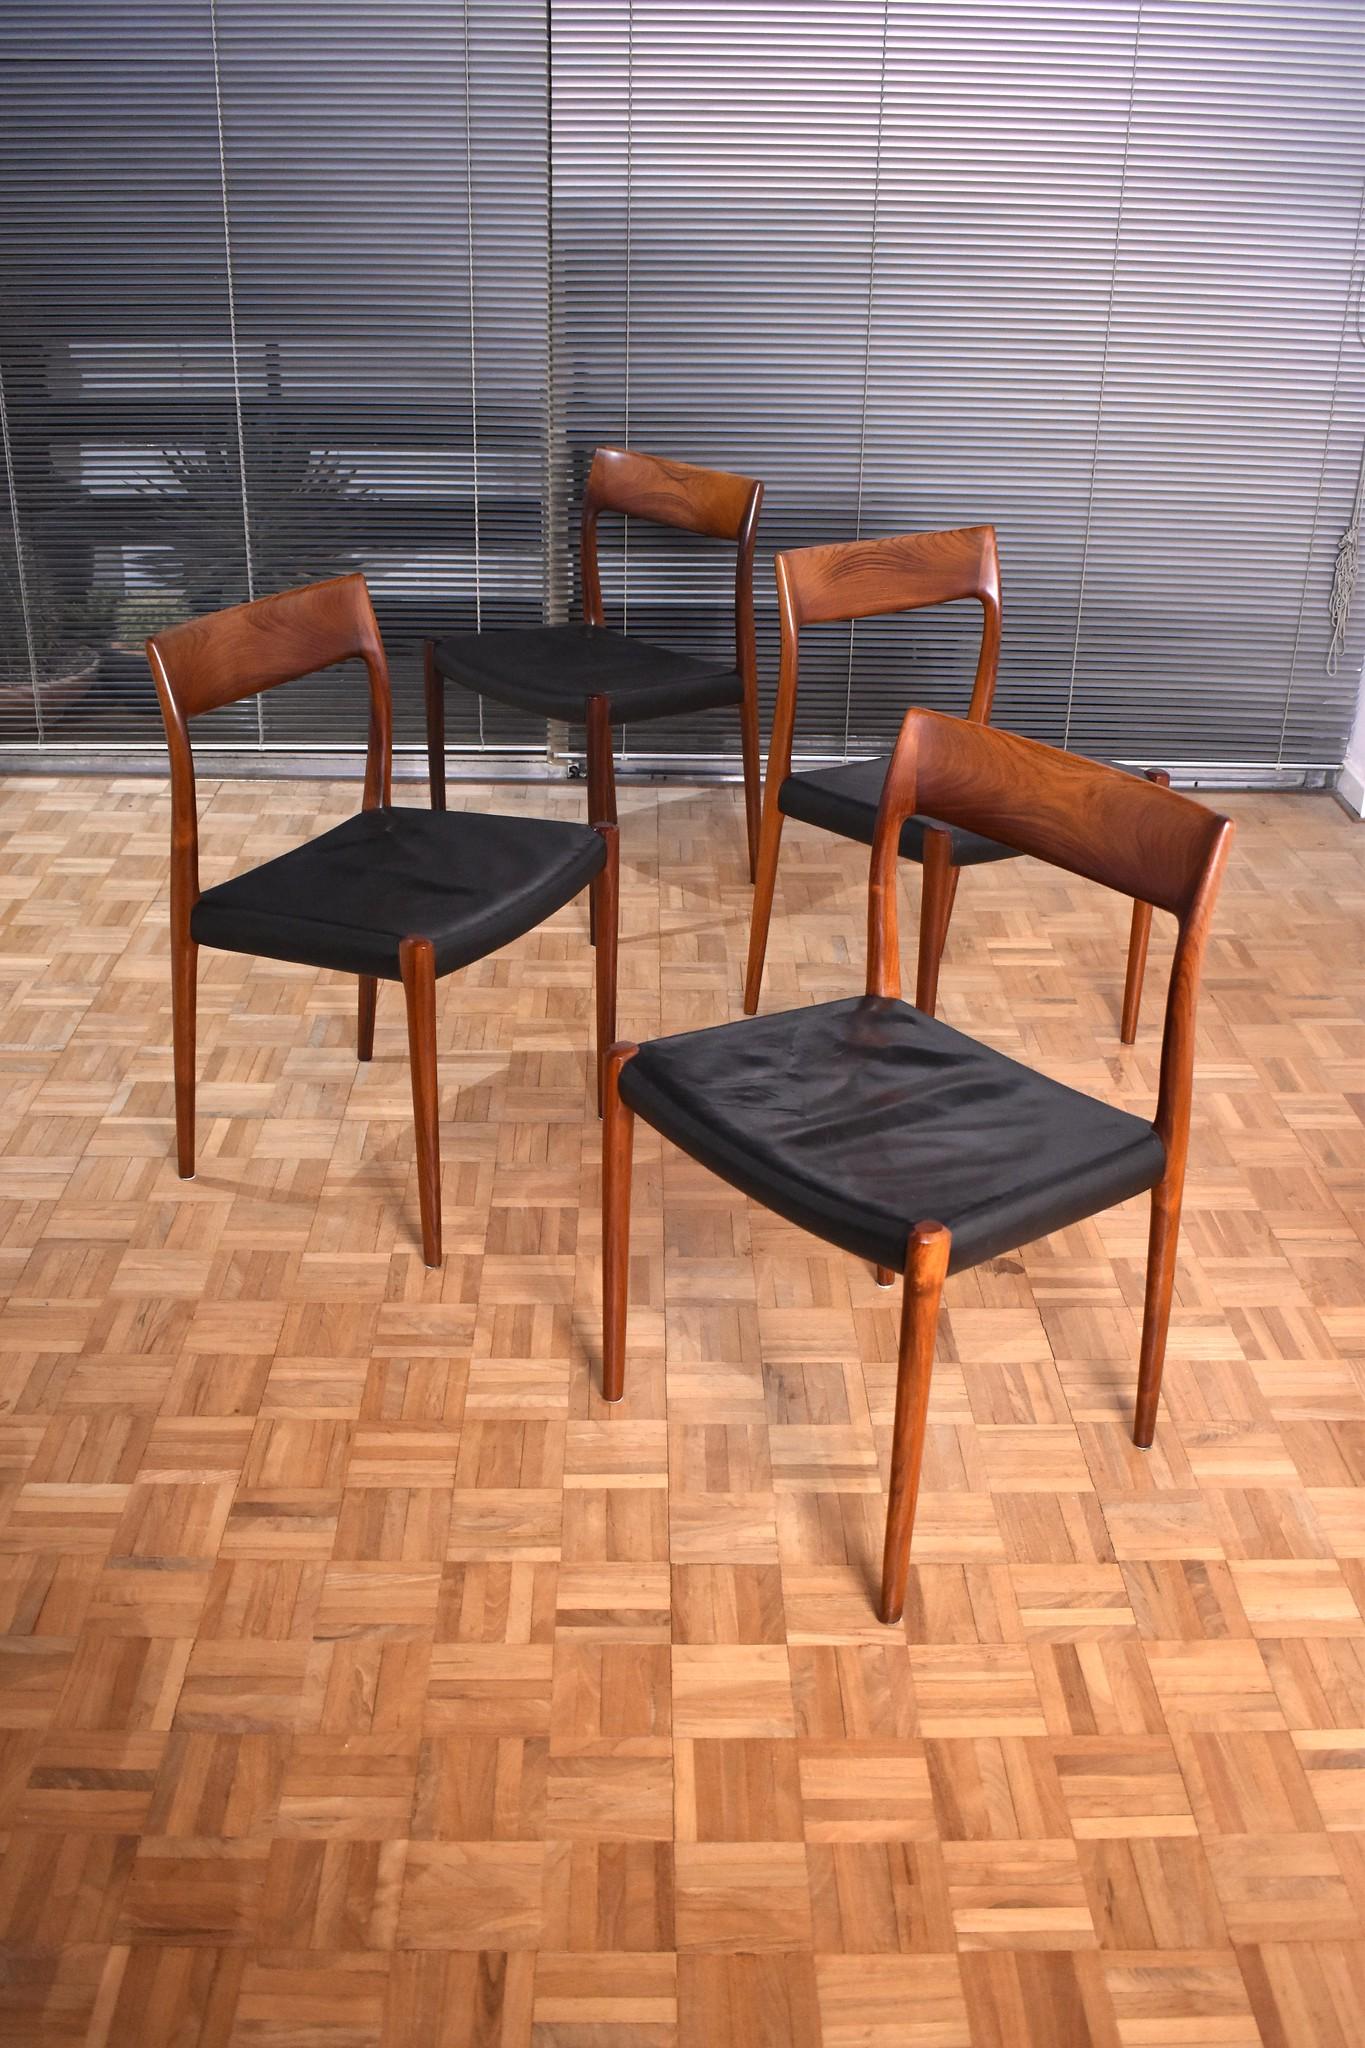 A stunning set of four Brazilian rosewood chairs designed in 1959 by Niels Moller for J.L Mollers Mobelfabrik.

These particular chairs still retain the original leather upholstery which has the most beautiful patina and character. We adore Moller